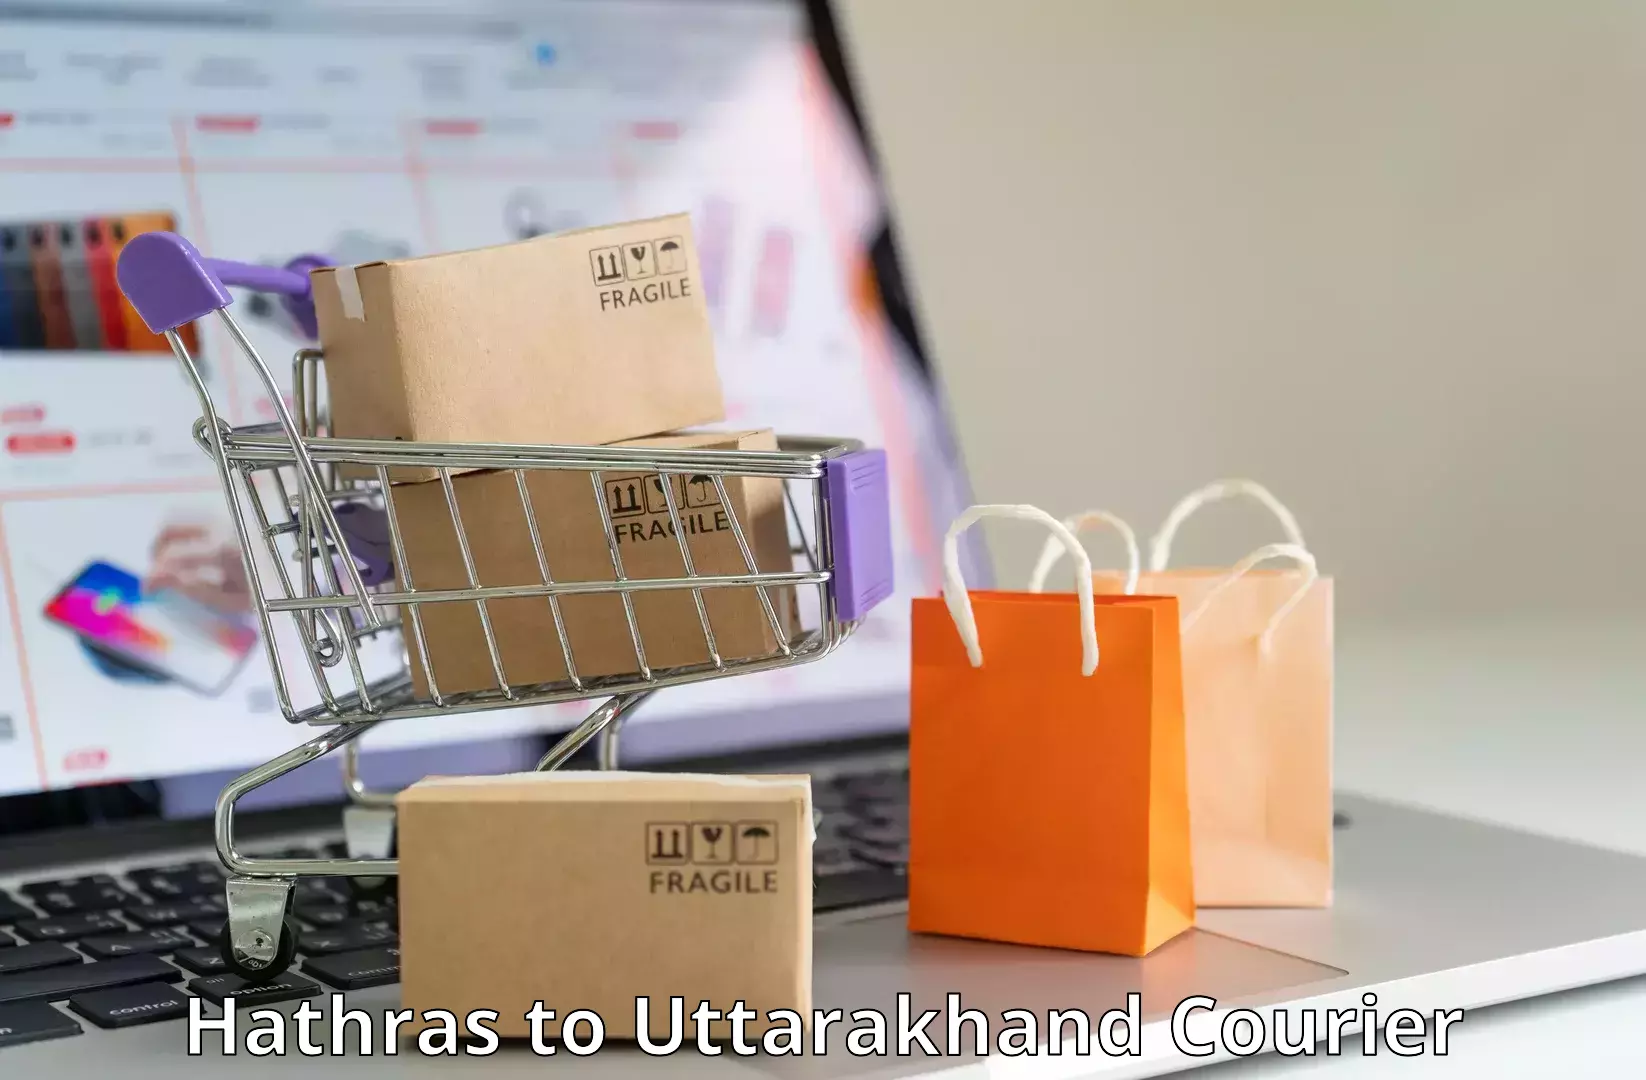 Affordable parcel service Hathras to Roorkee